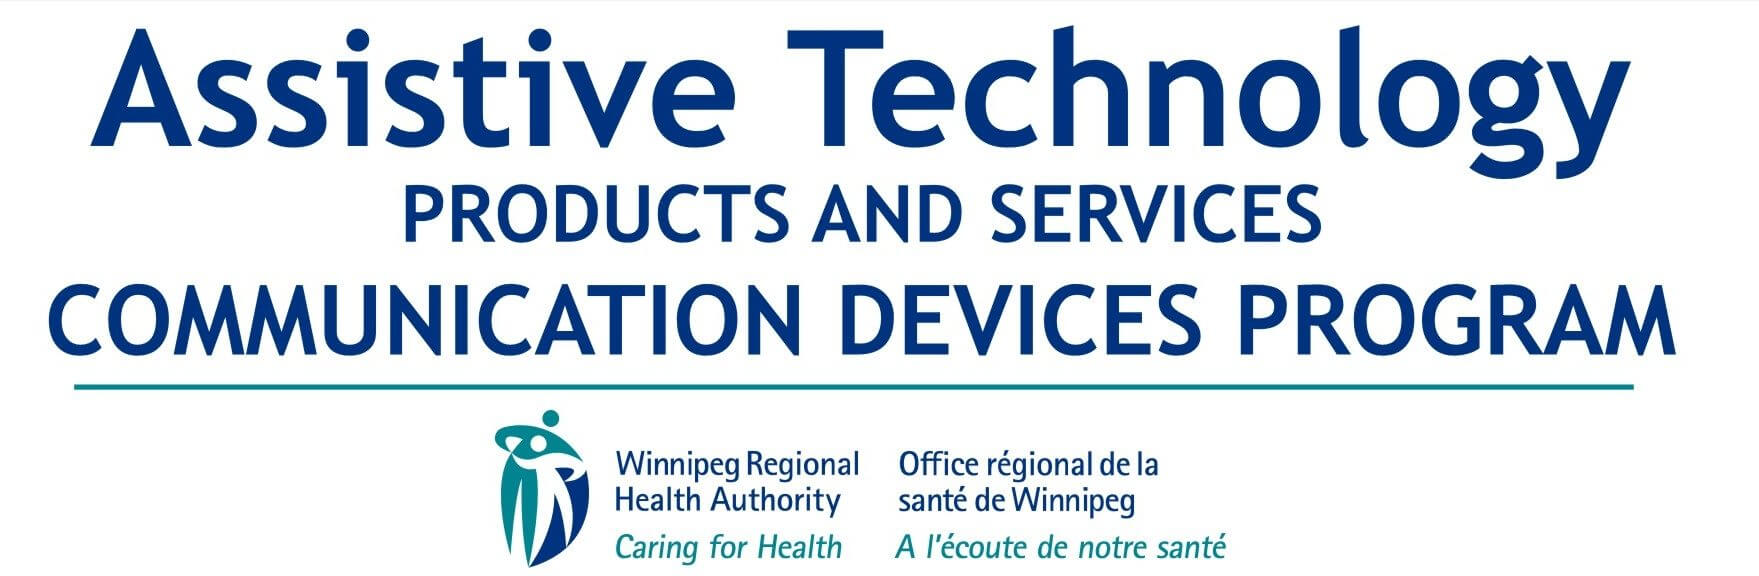 Assistive Technology Products and Services: Communication Devices Program Logo